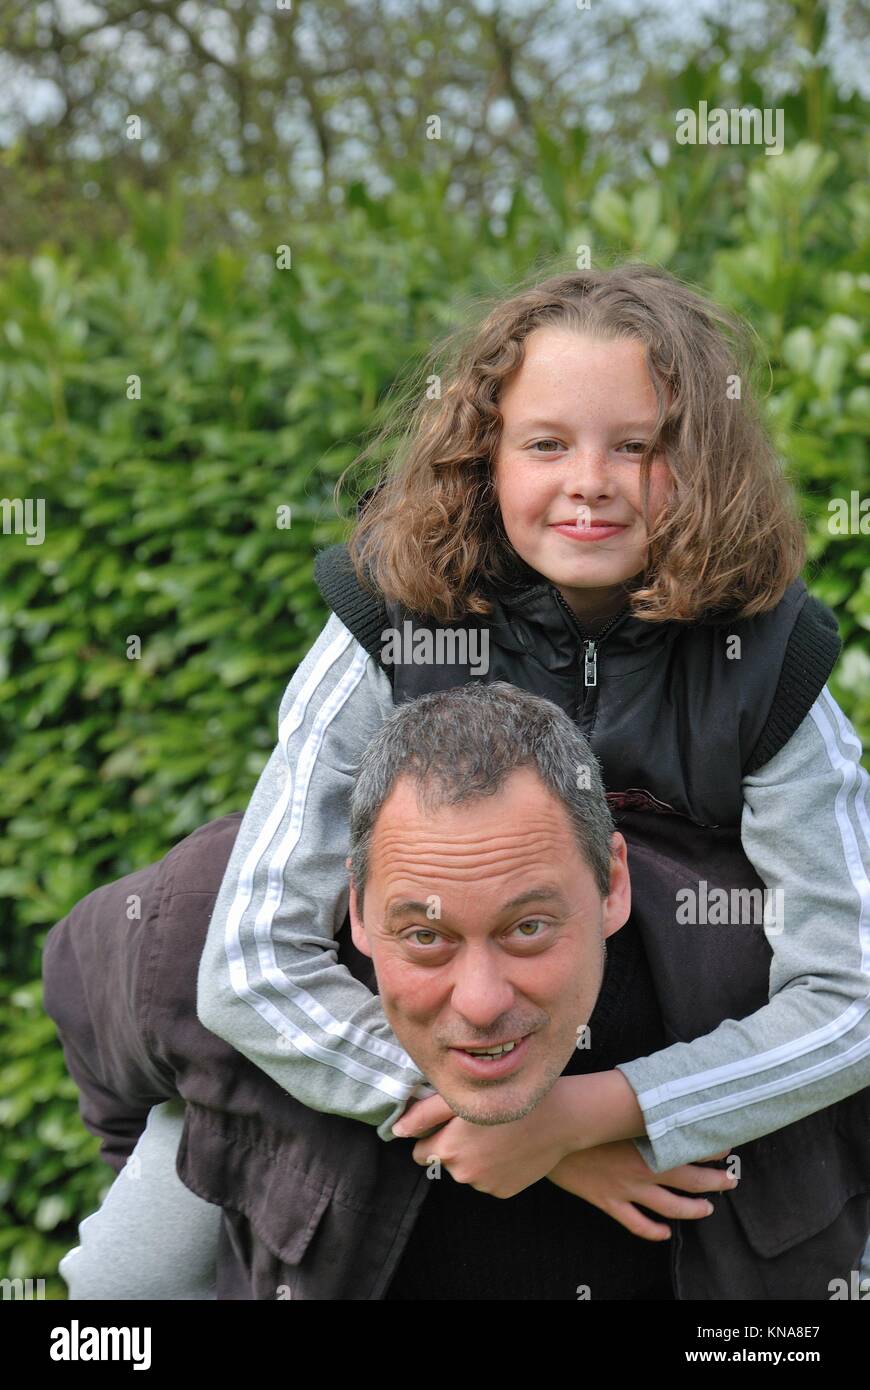 Complicity between father and daughter. Stock Photo